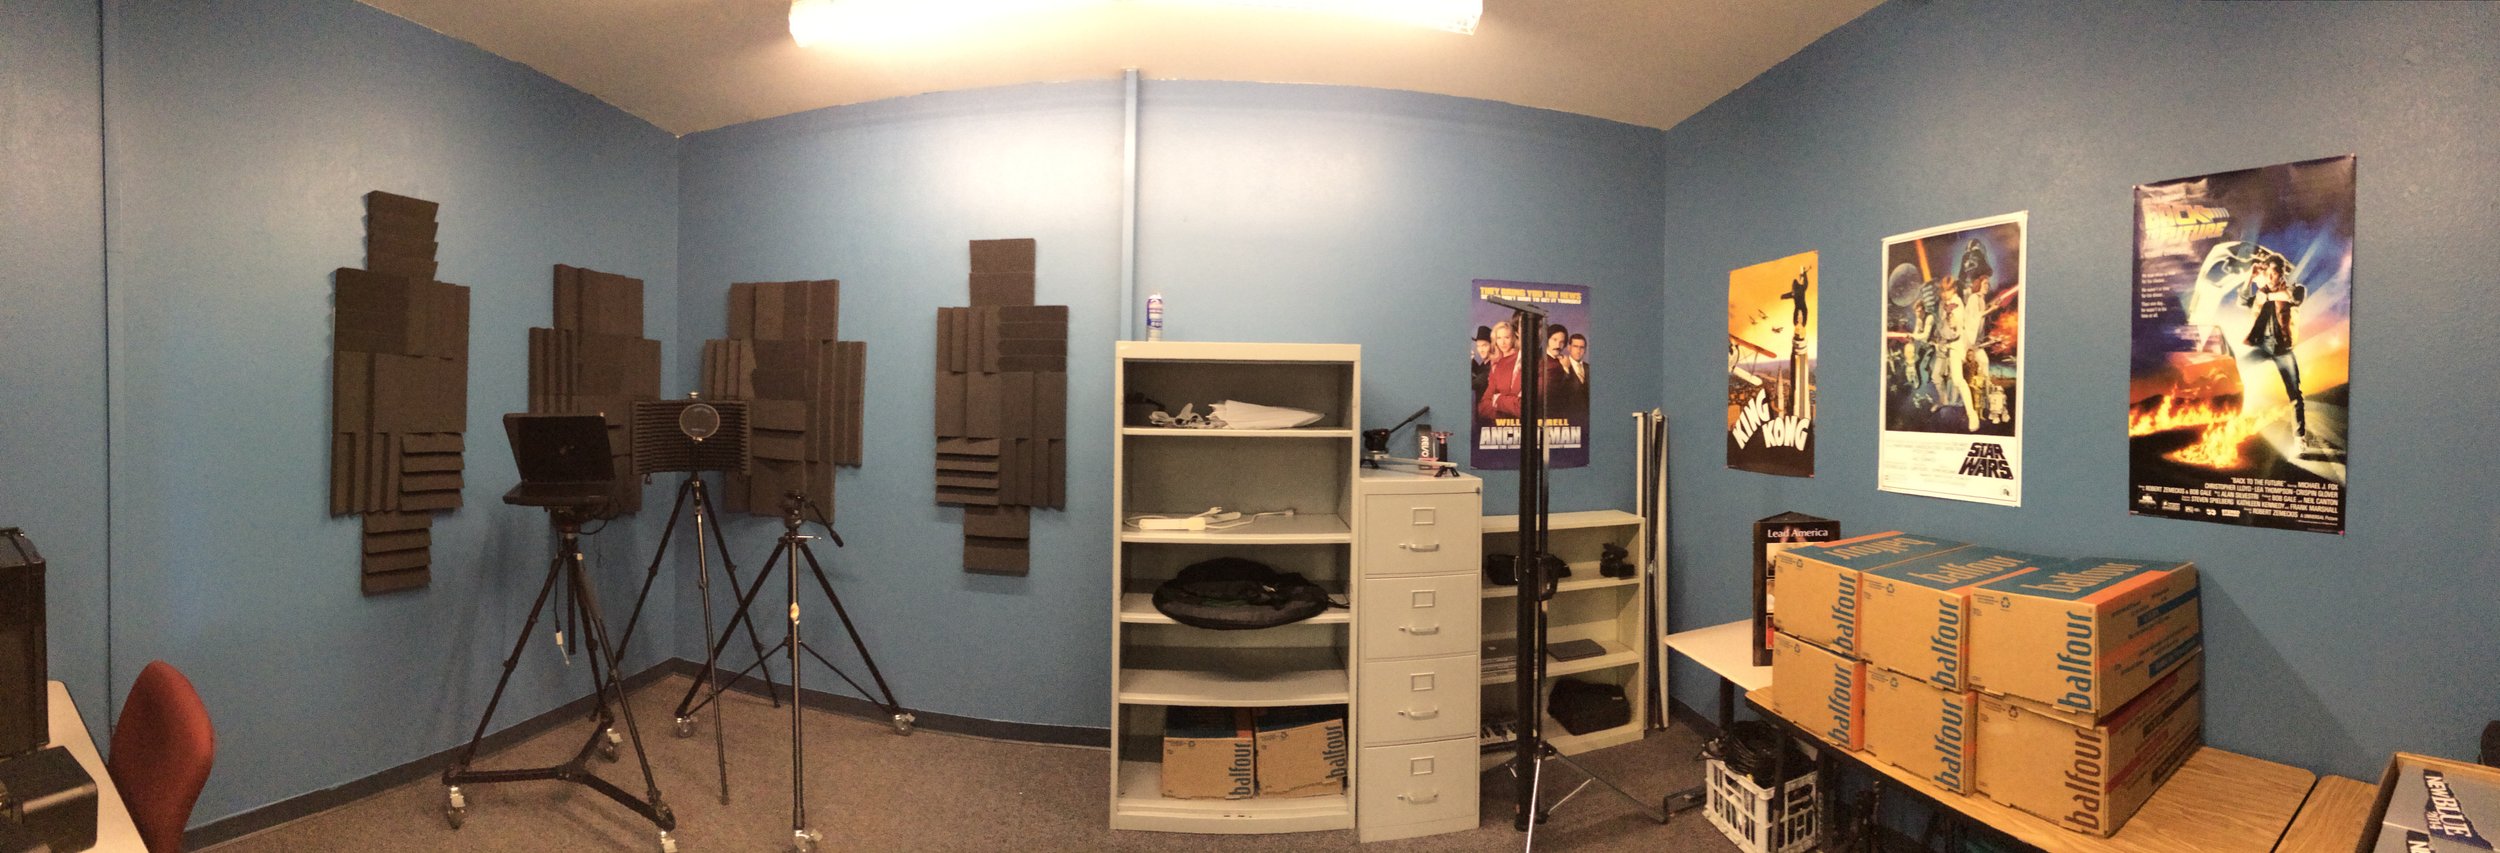  Once the green screen was moved out, I turned the back room into an equipment locker/VoiceOver booth.  